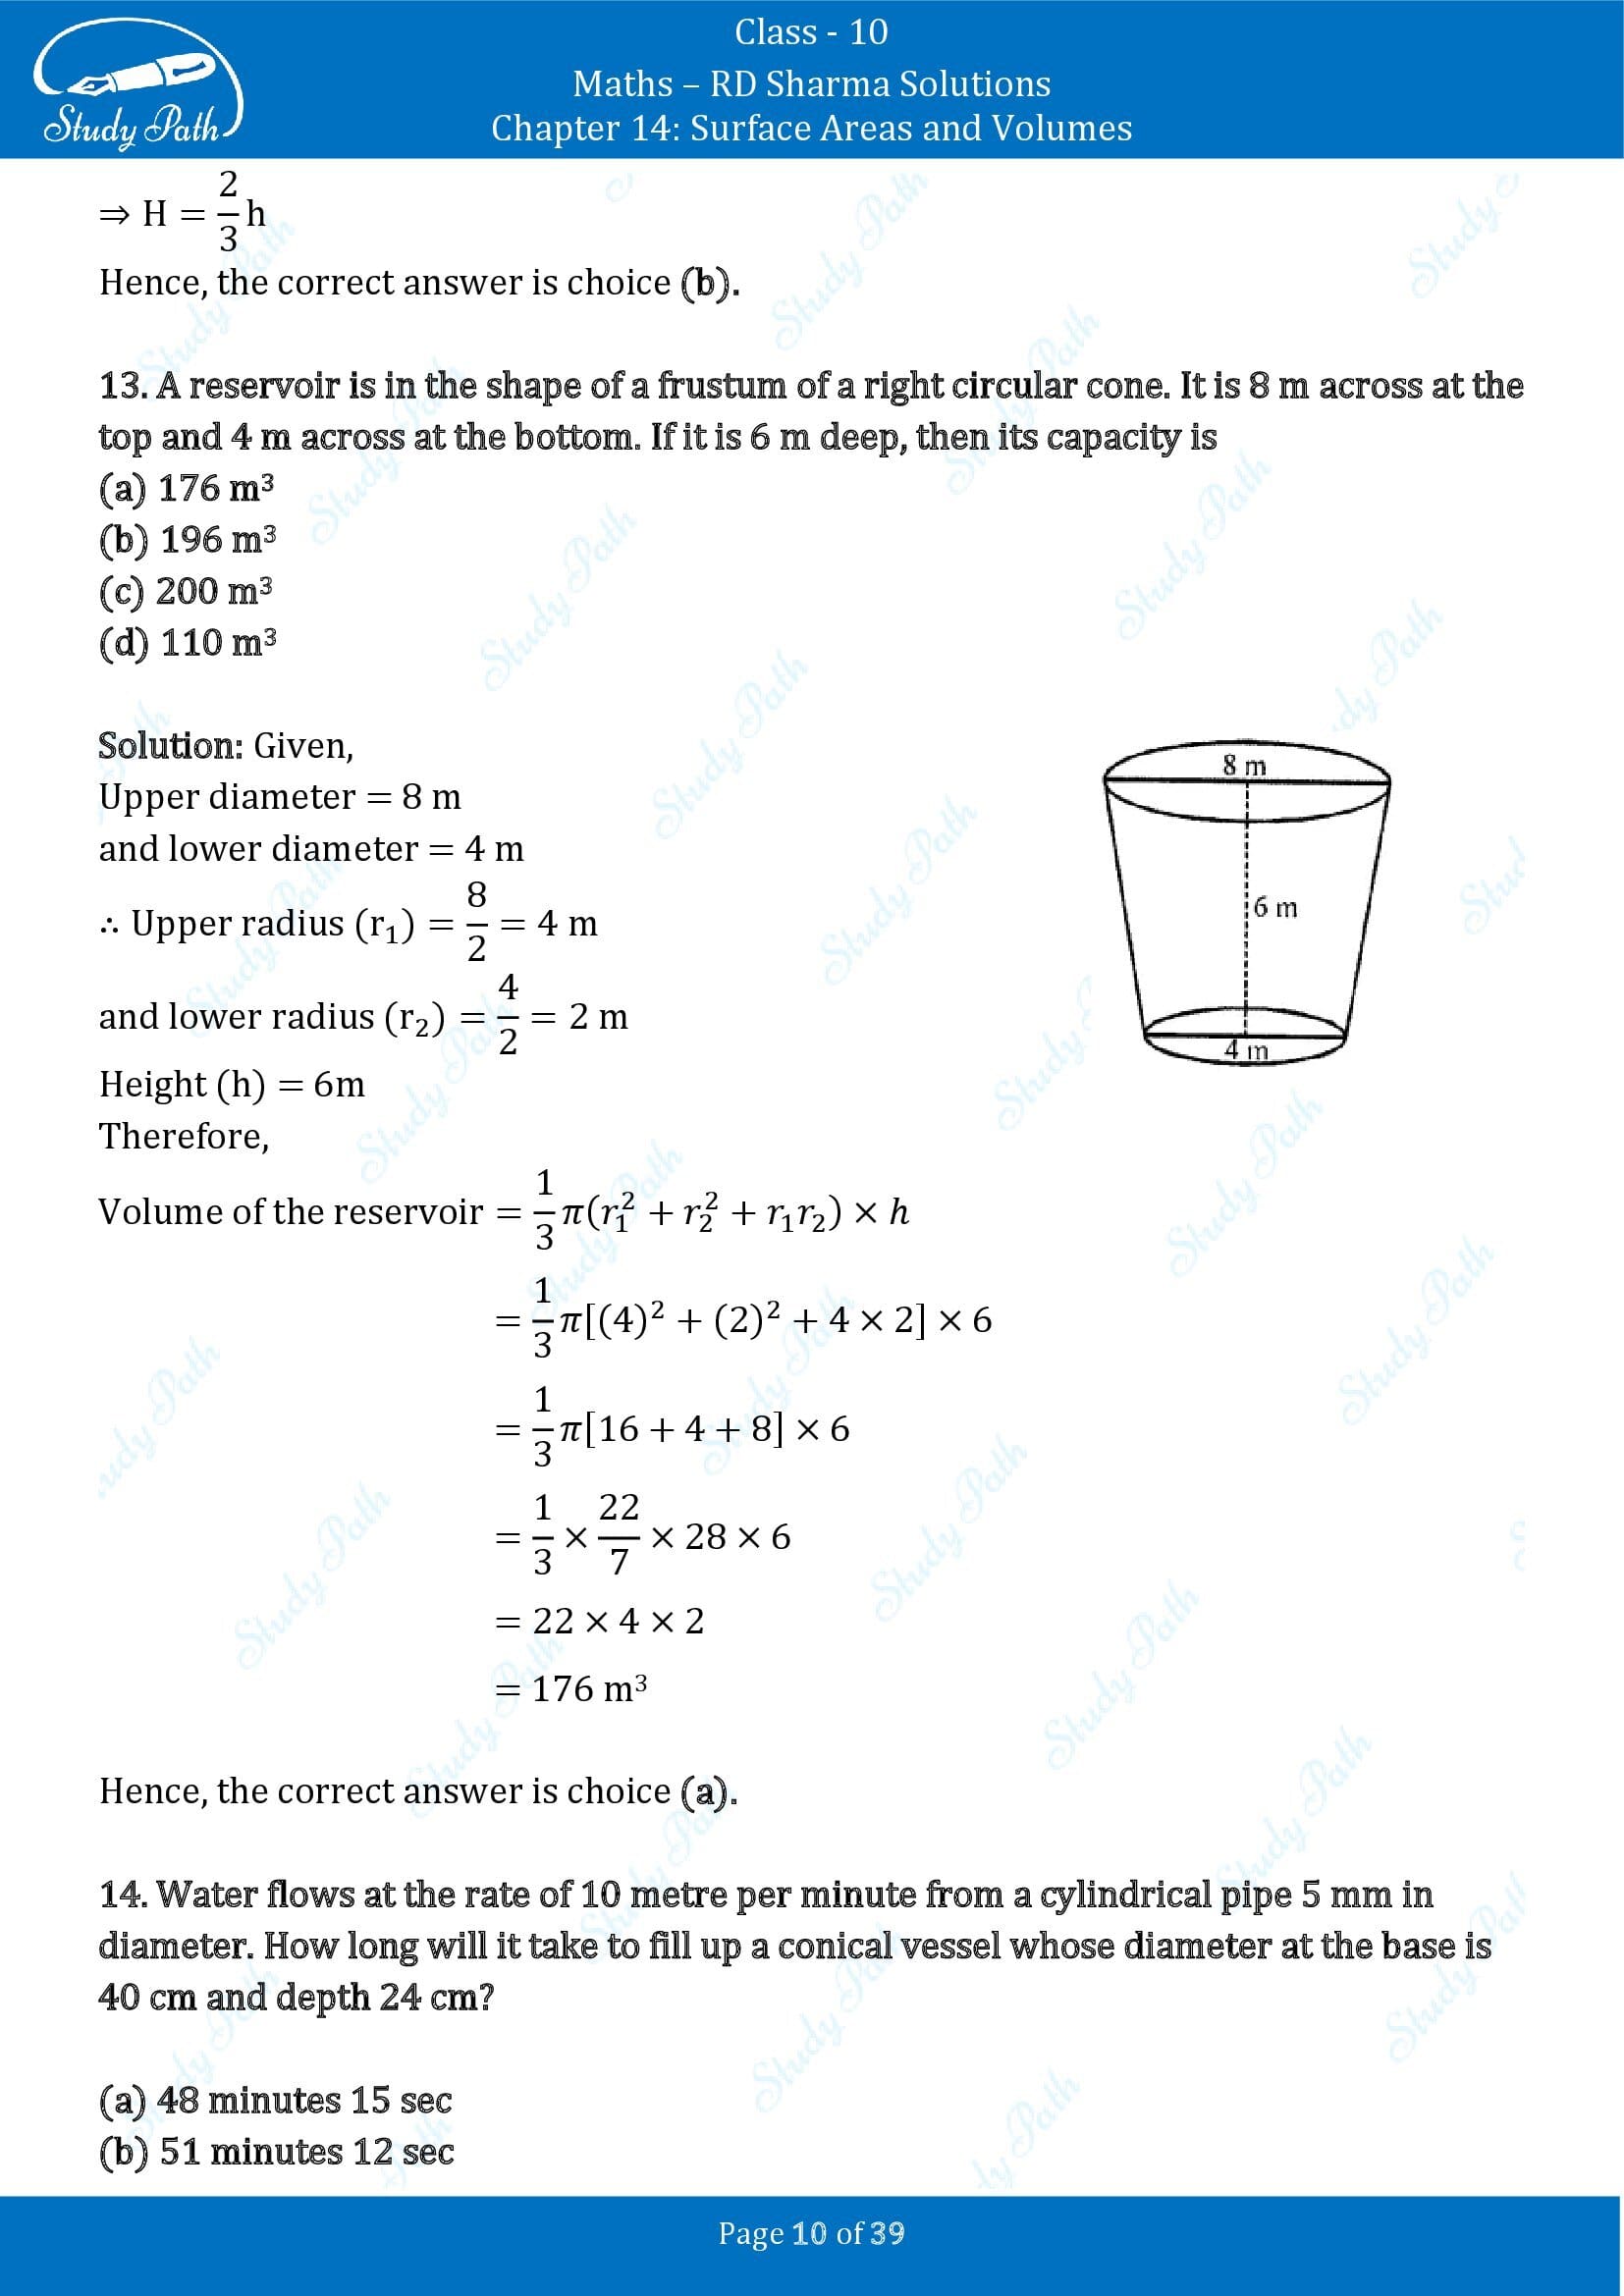 RD Sharma Solutions Class 10 Chapter 14 Surface Areas and Volumes Multiple Choice Question MCQs 00010